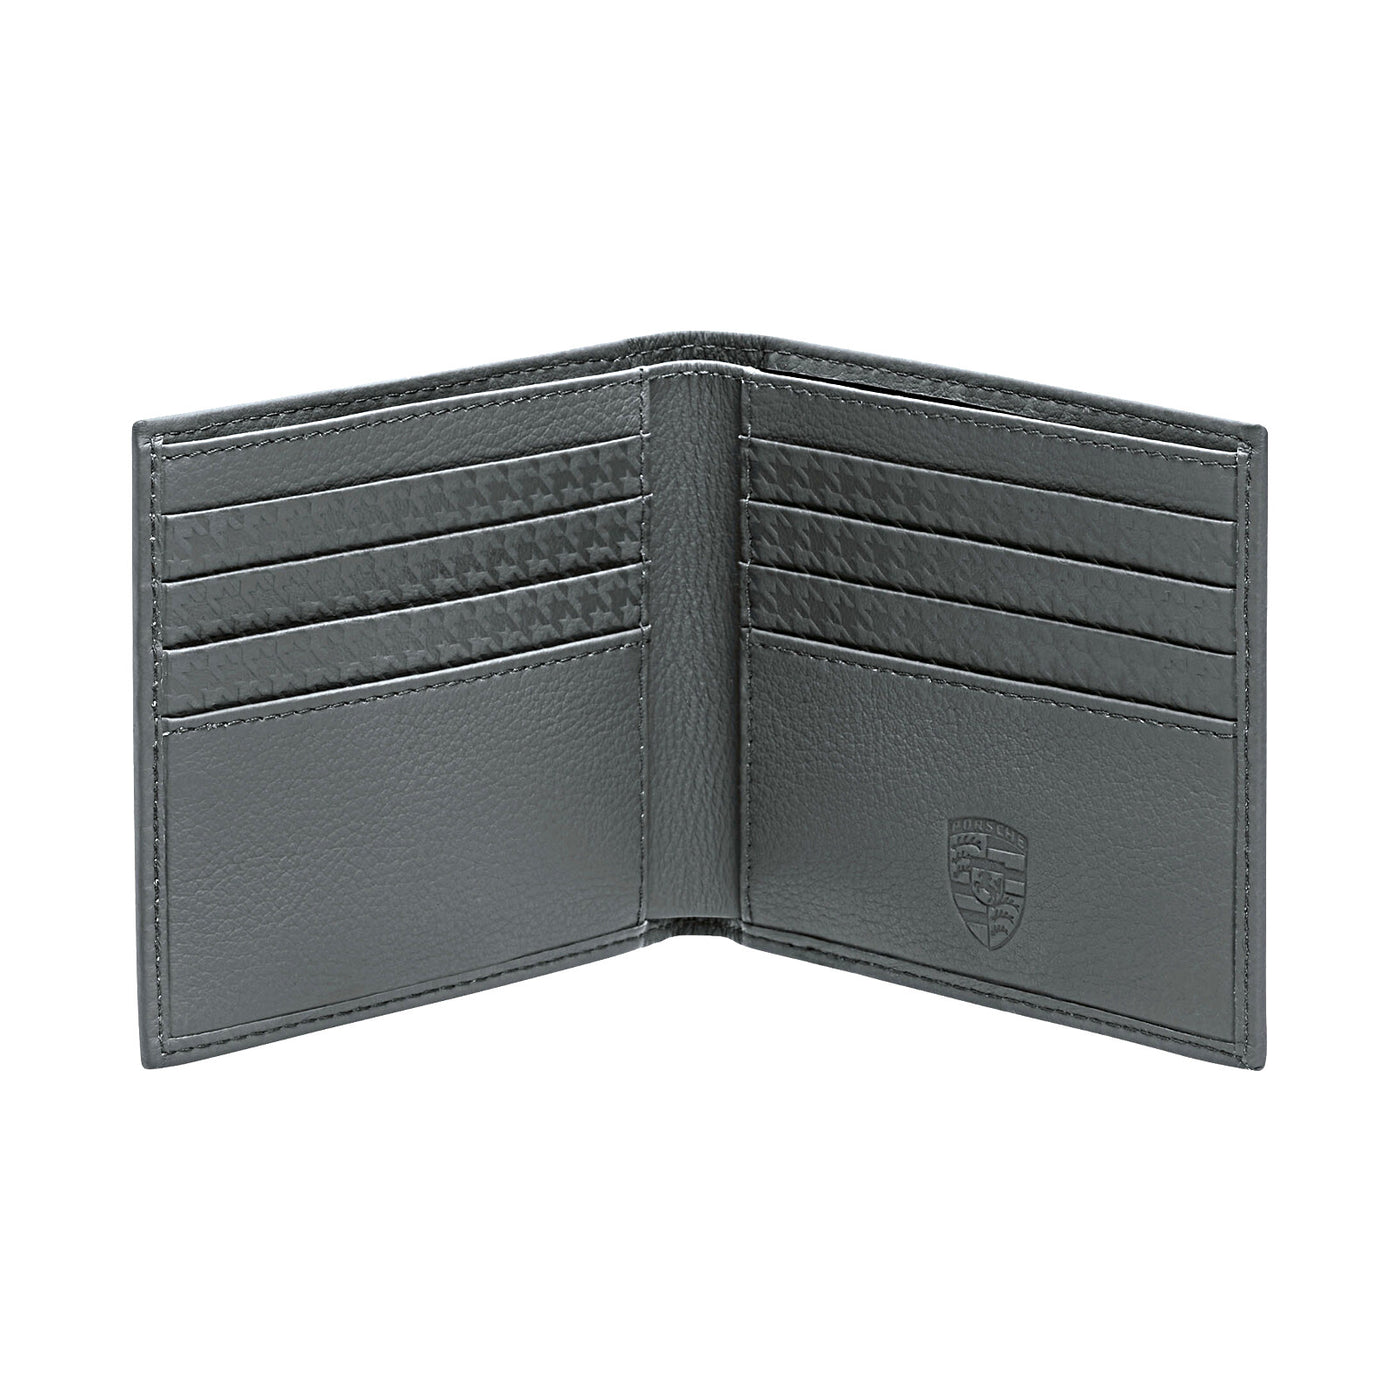 Porsche Wallet Card Pouch- Heritage Collection